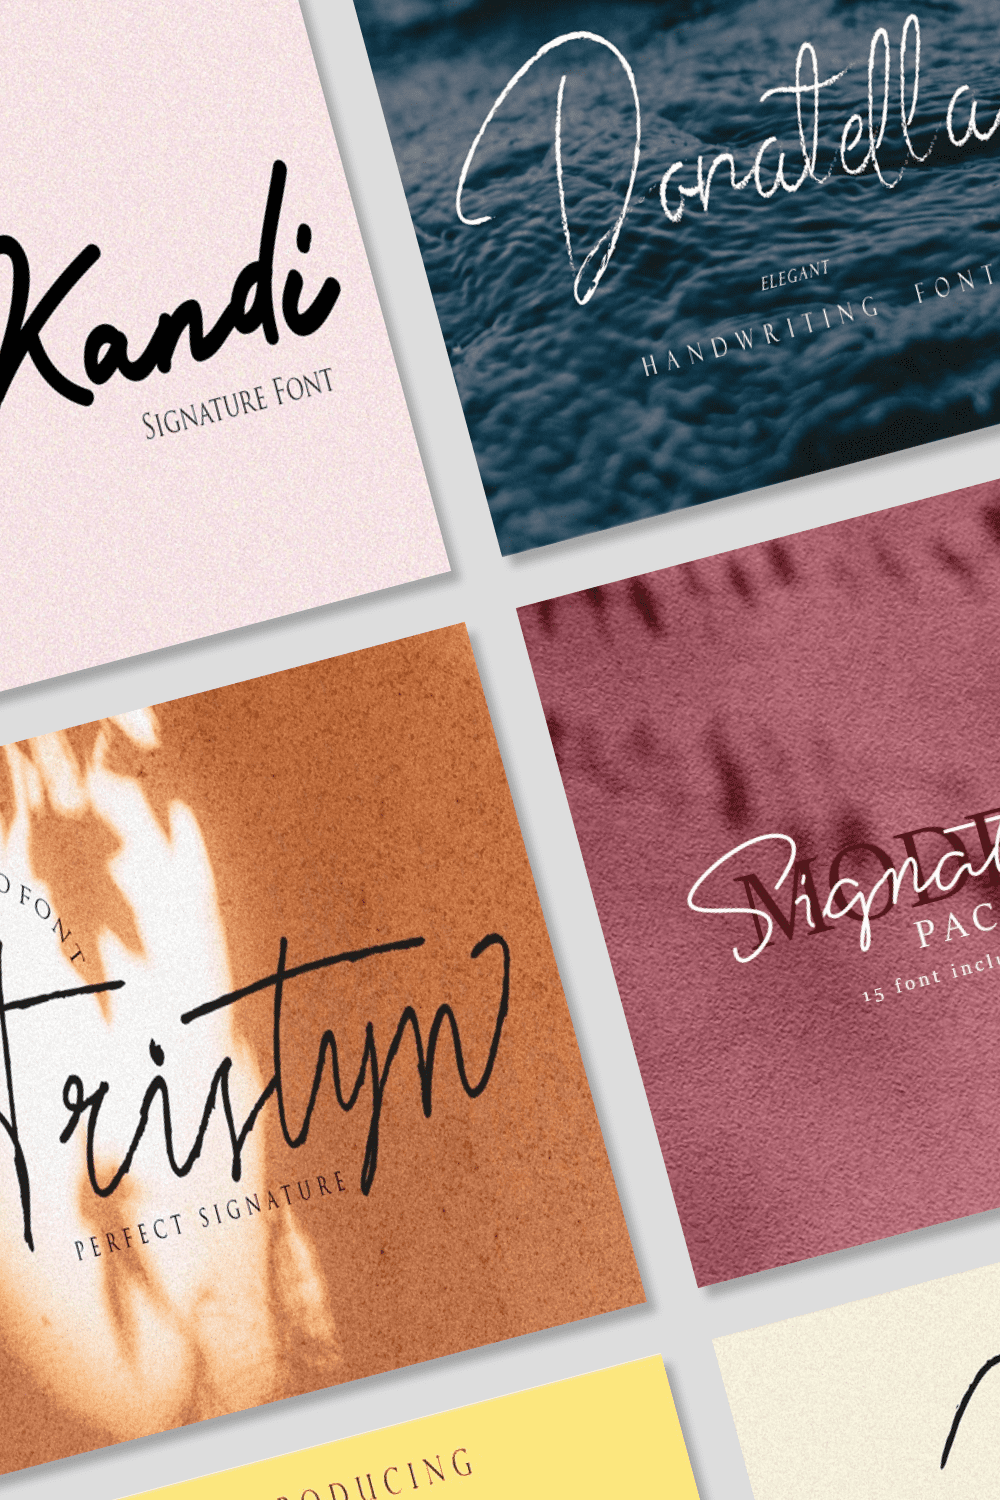 Modern Signature Fonts gallery.